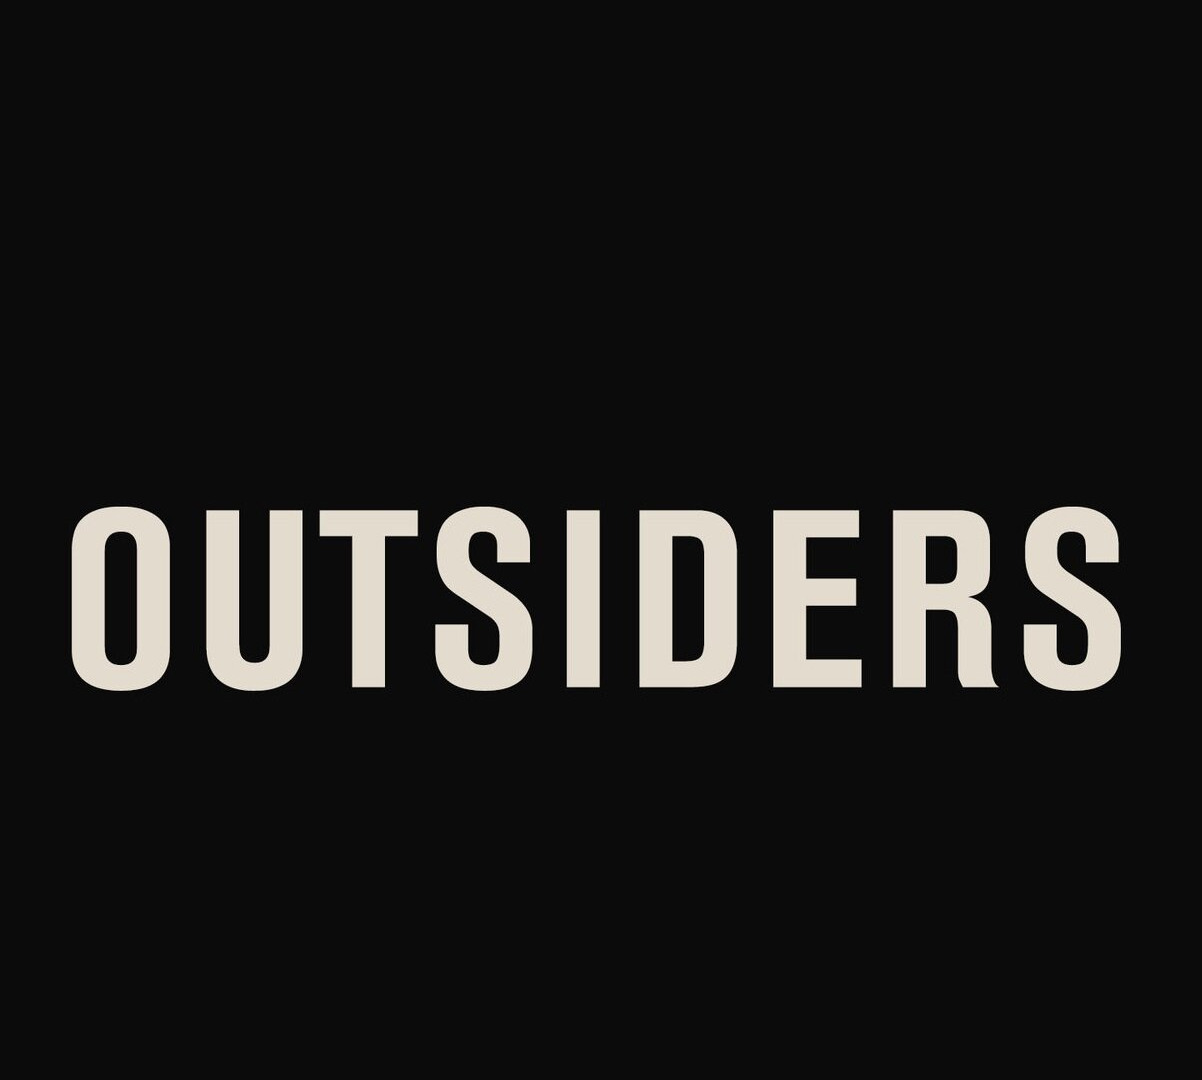 Show David Mitchell's Outsiders